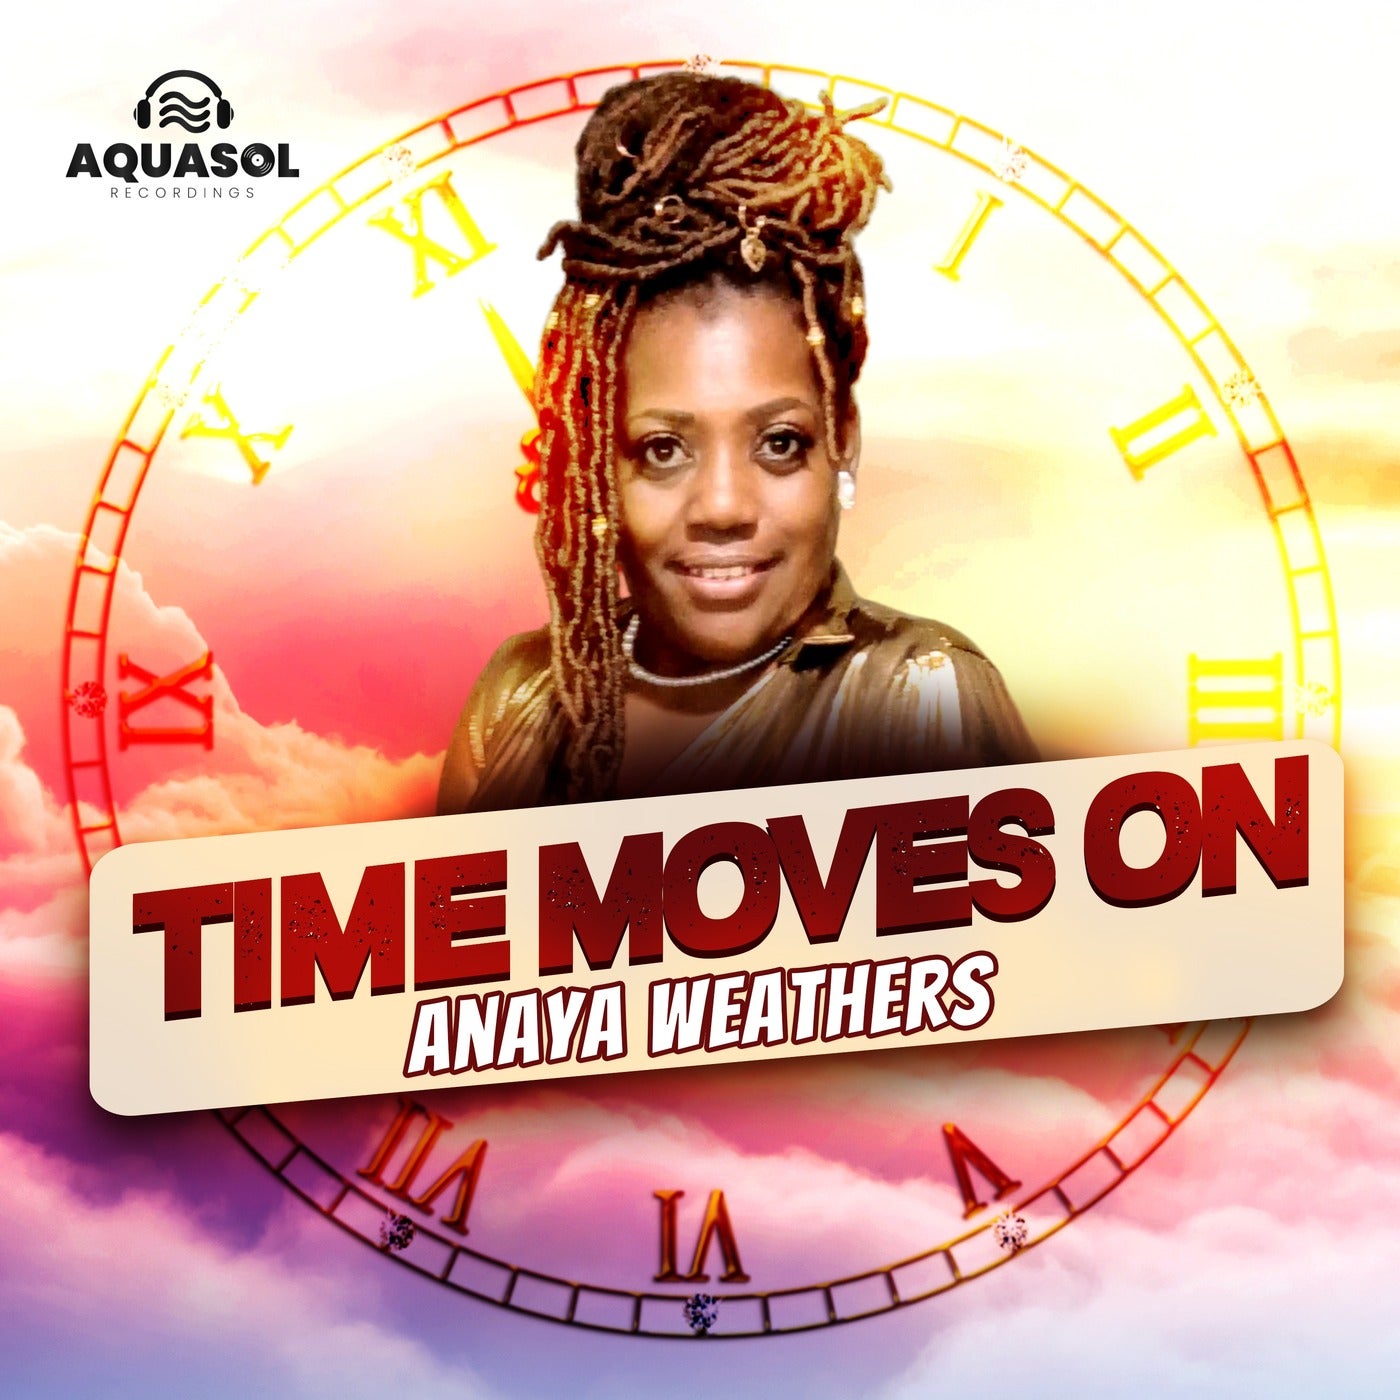 Time Moves On (Big Logan's Afro Warp Mix)